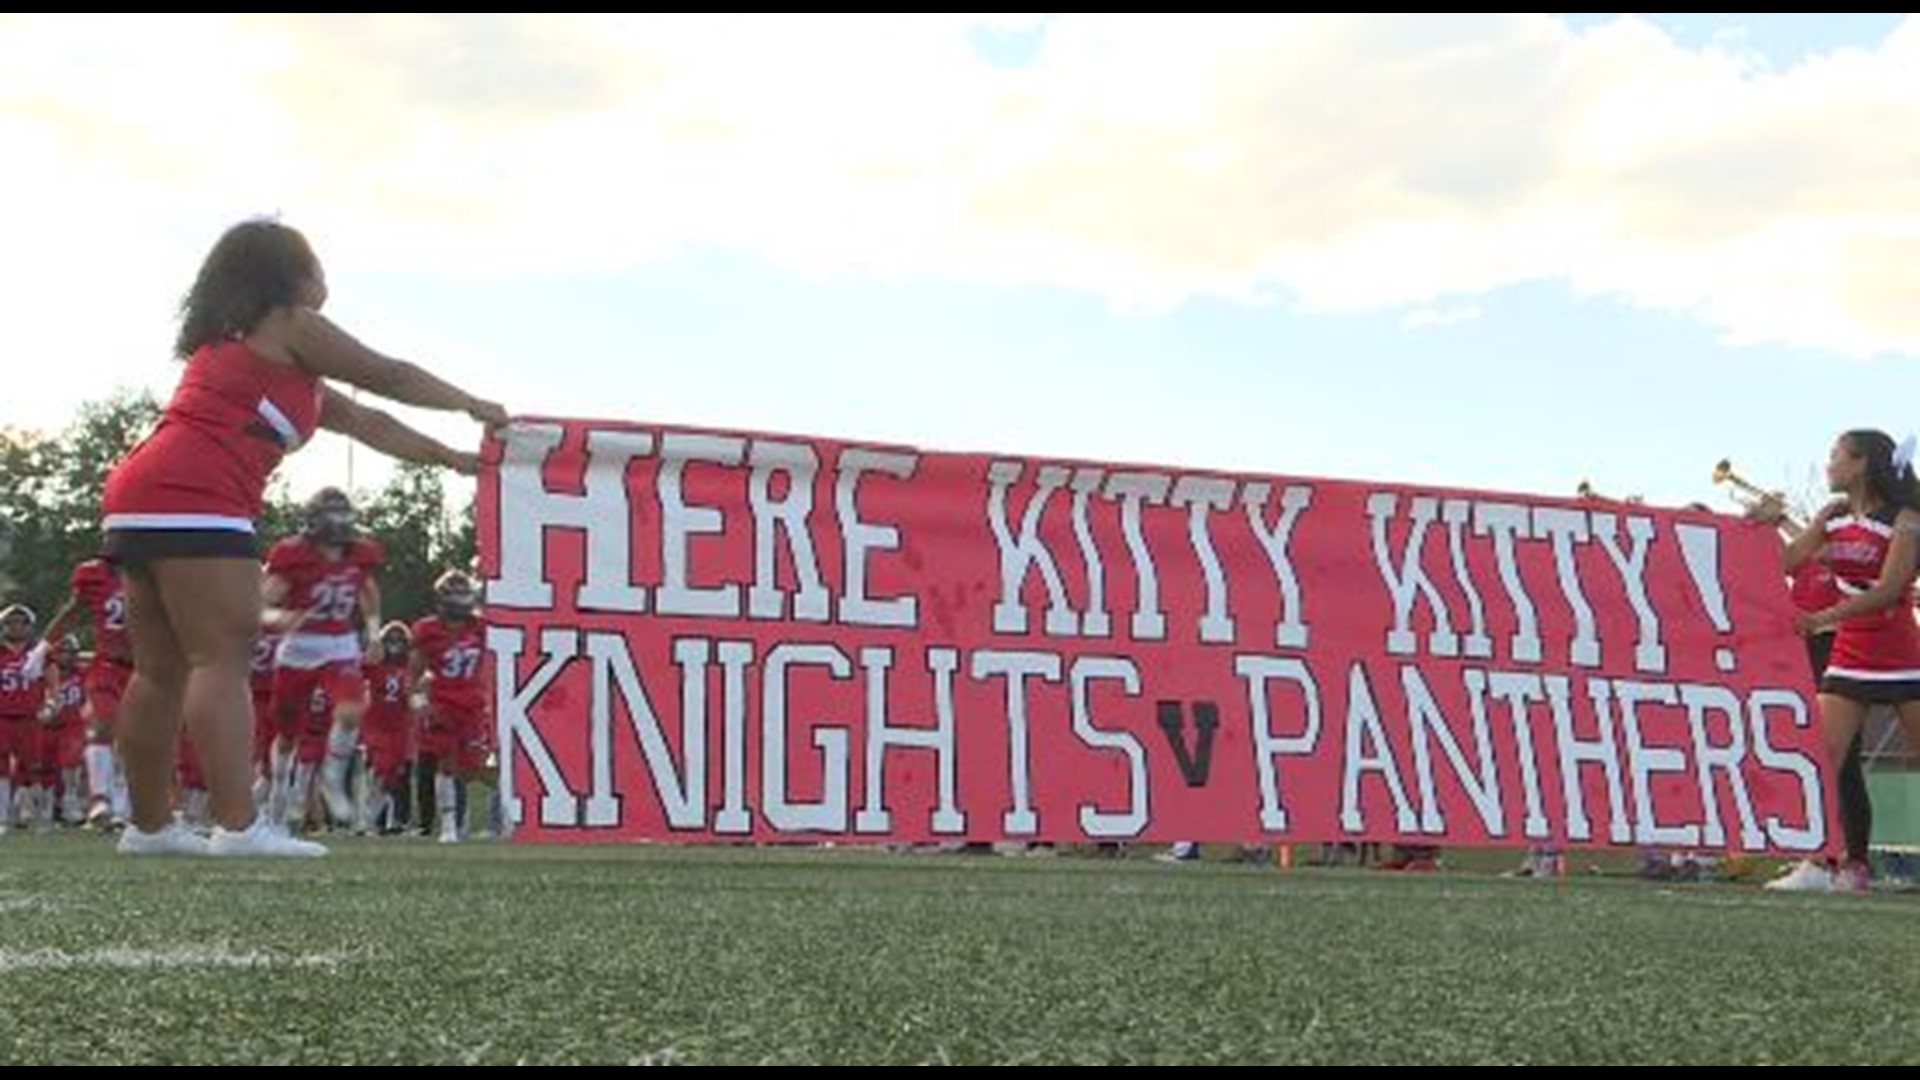 The Knights beat the Panthers 42-21 Friday night for their 13th rivalry victory in a row.